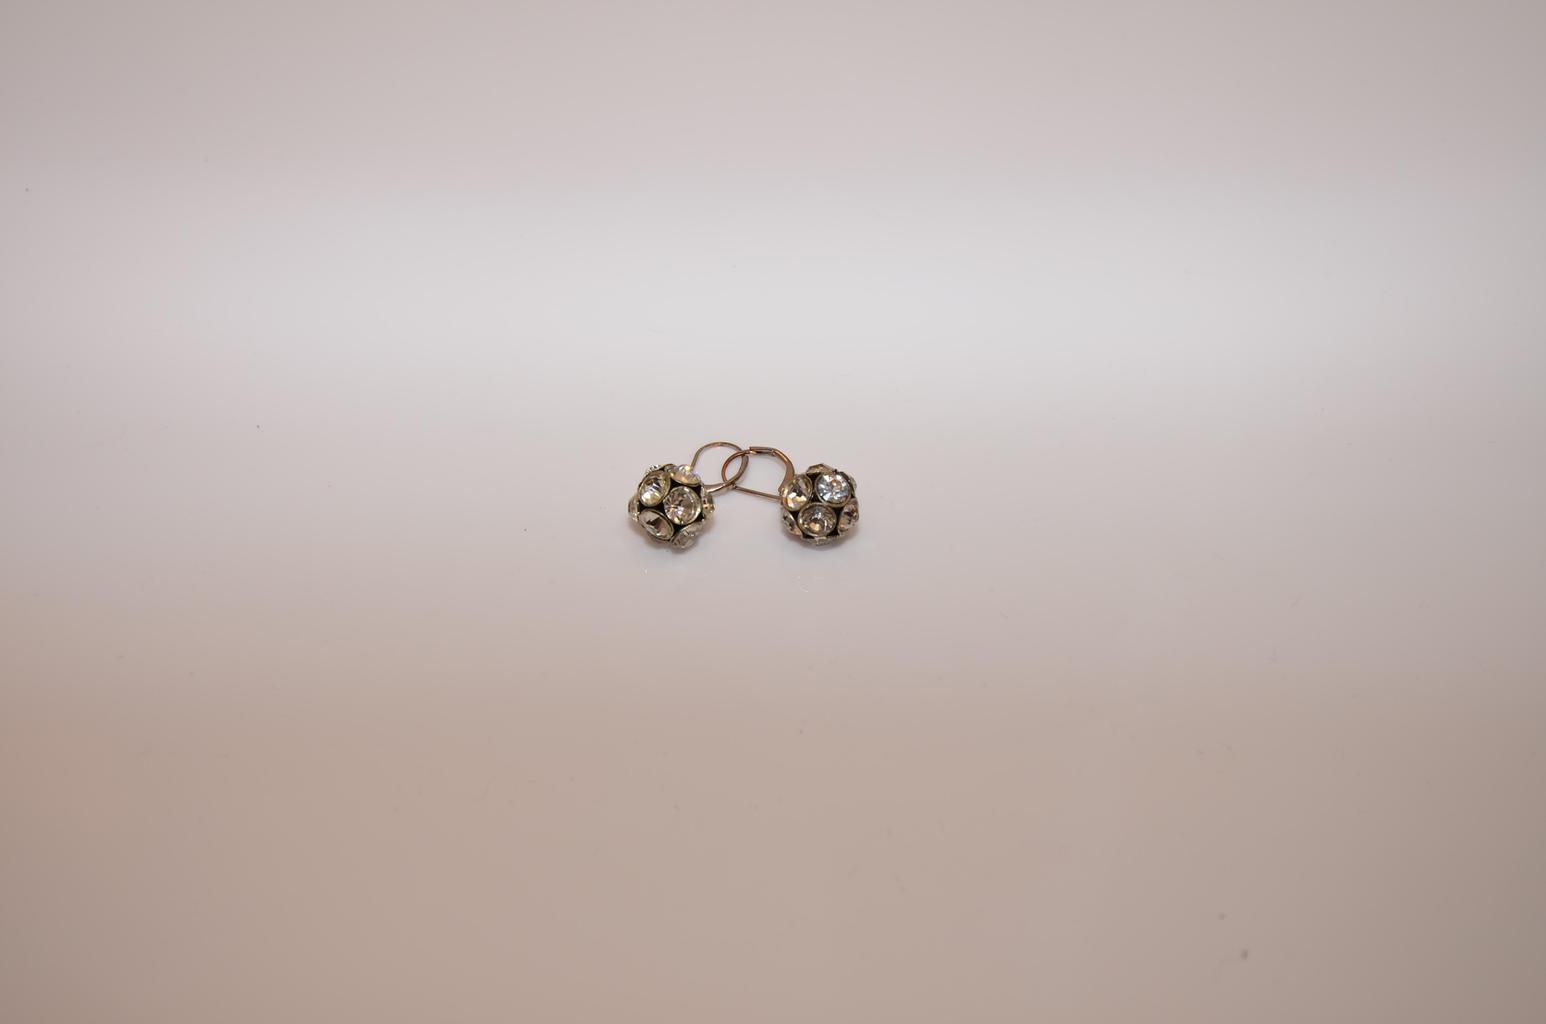 Diamond Earrings are a Great Holiday Gift!